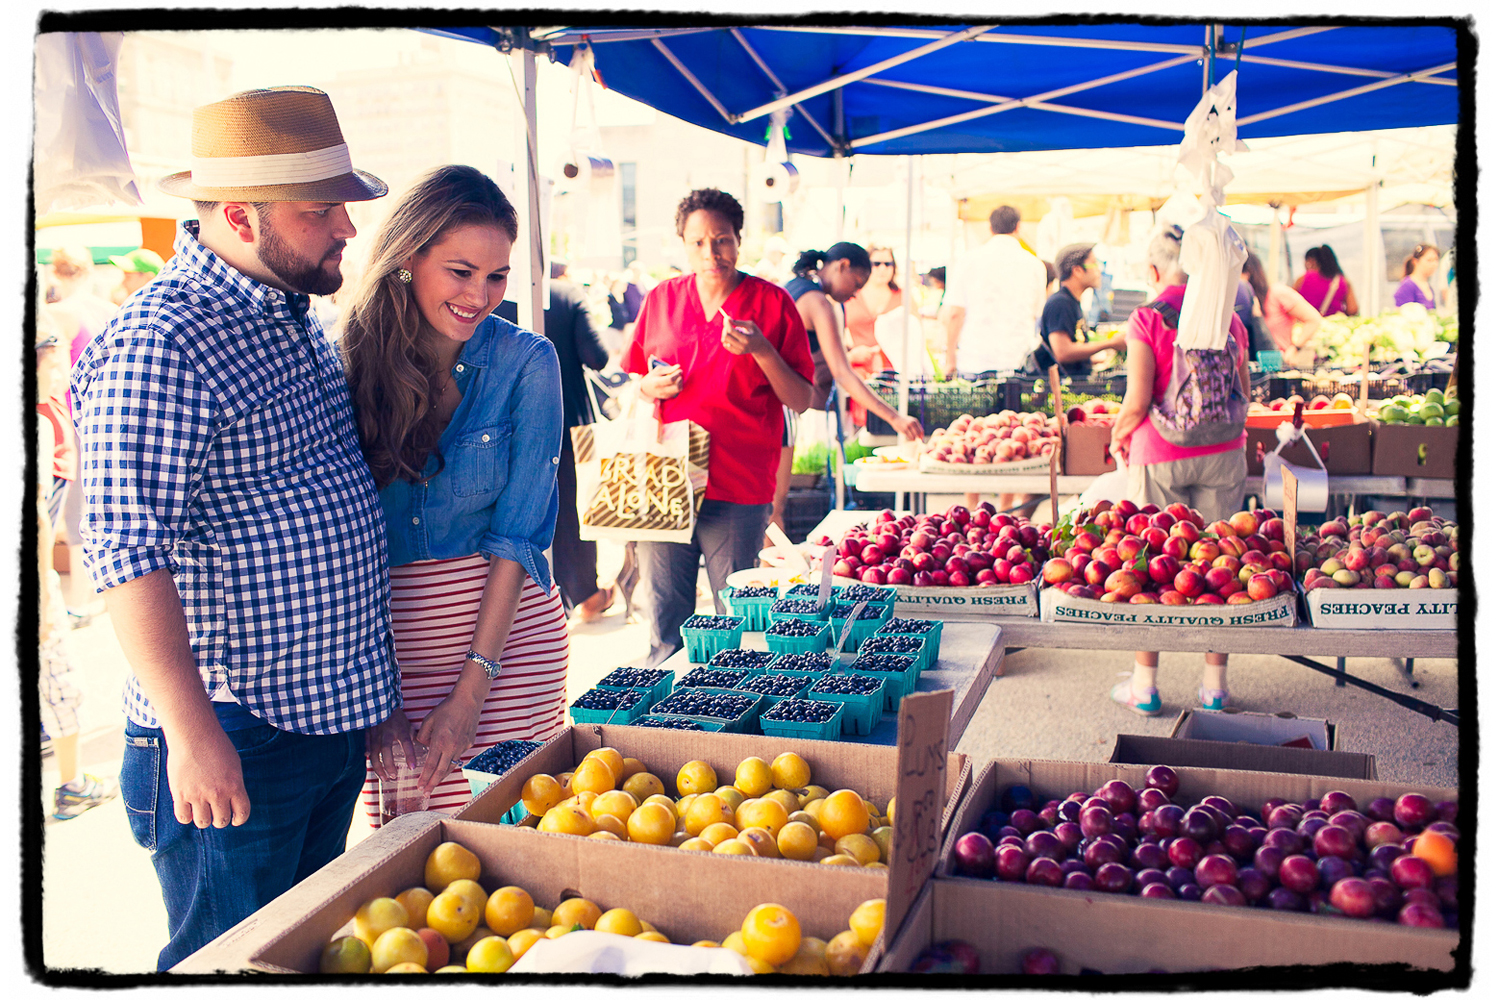 Engagement Portrait: Alexandra & Will check out the goods at the Prospect Park Farmers' Market.